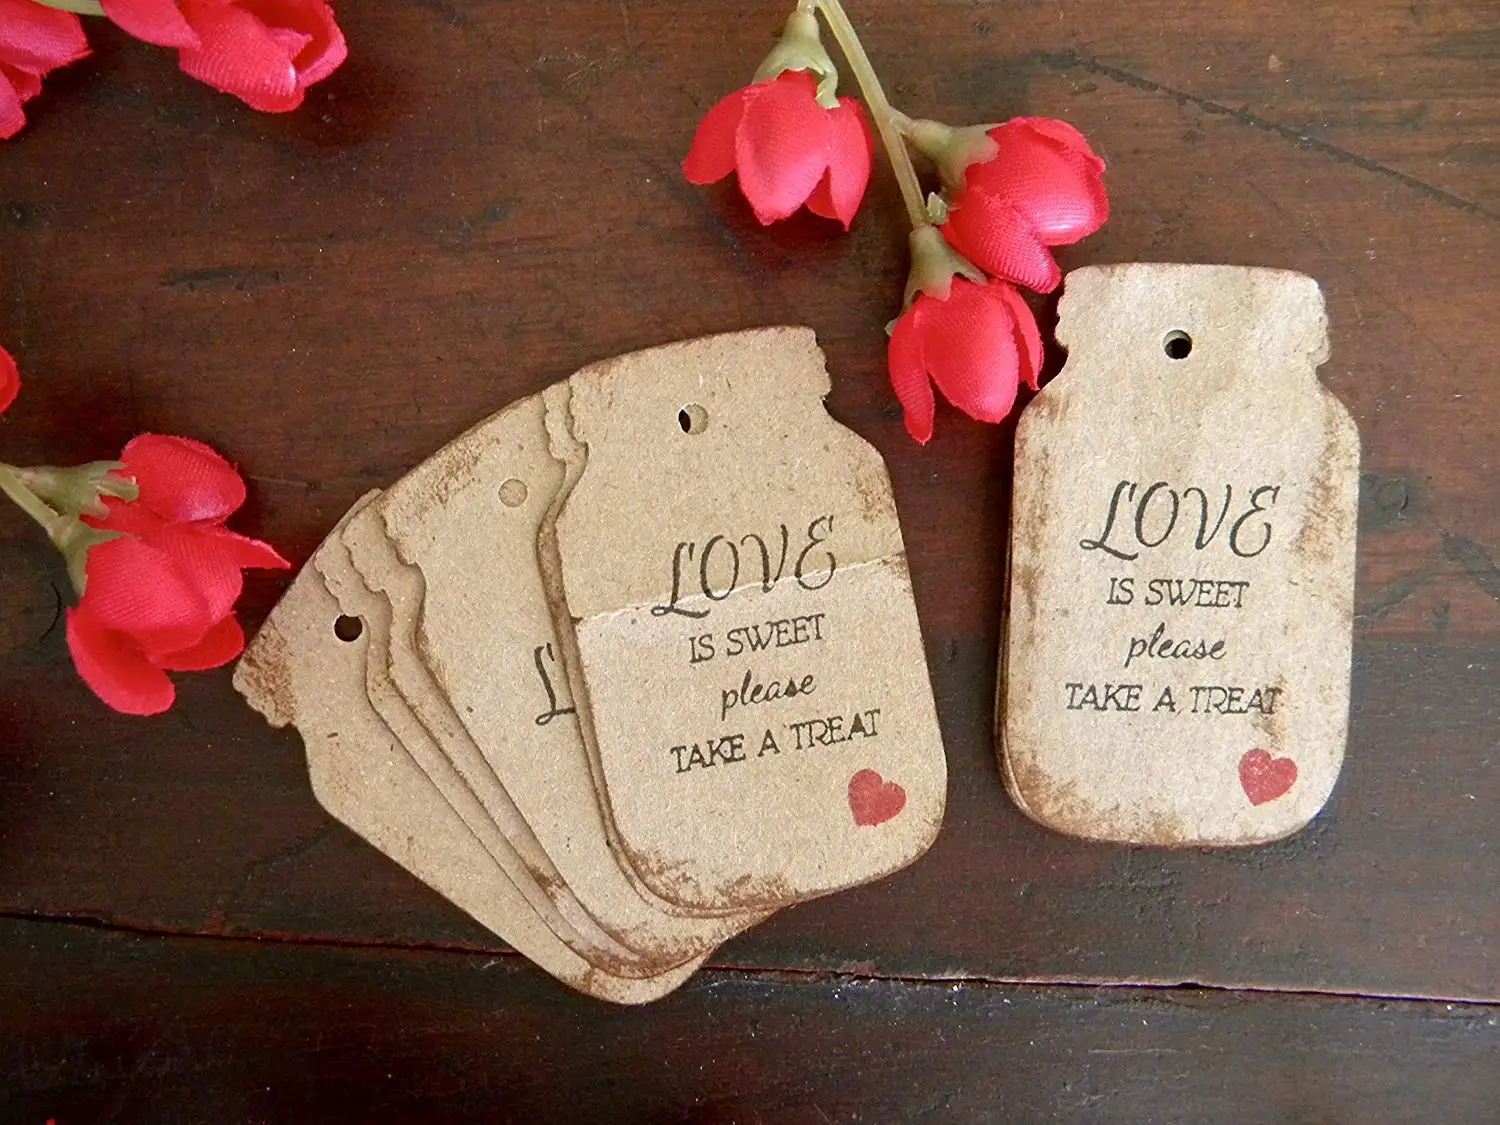 Cheap Wedding Labels Tags Find Wedding Labels Tags Deals On Line At